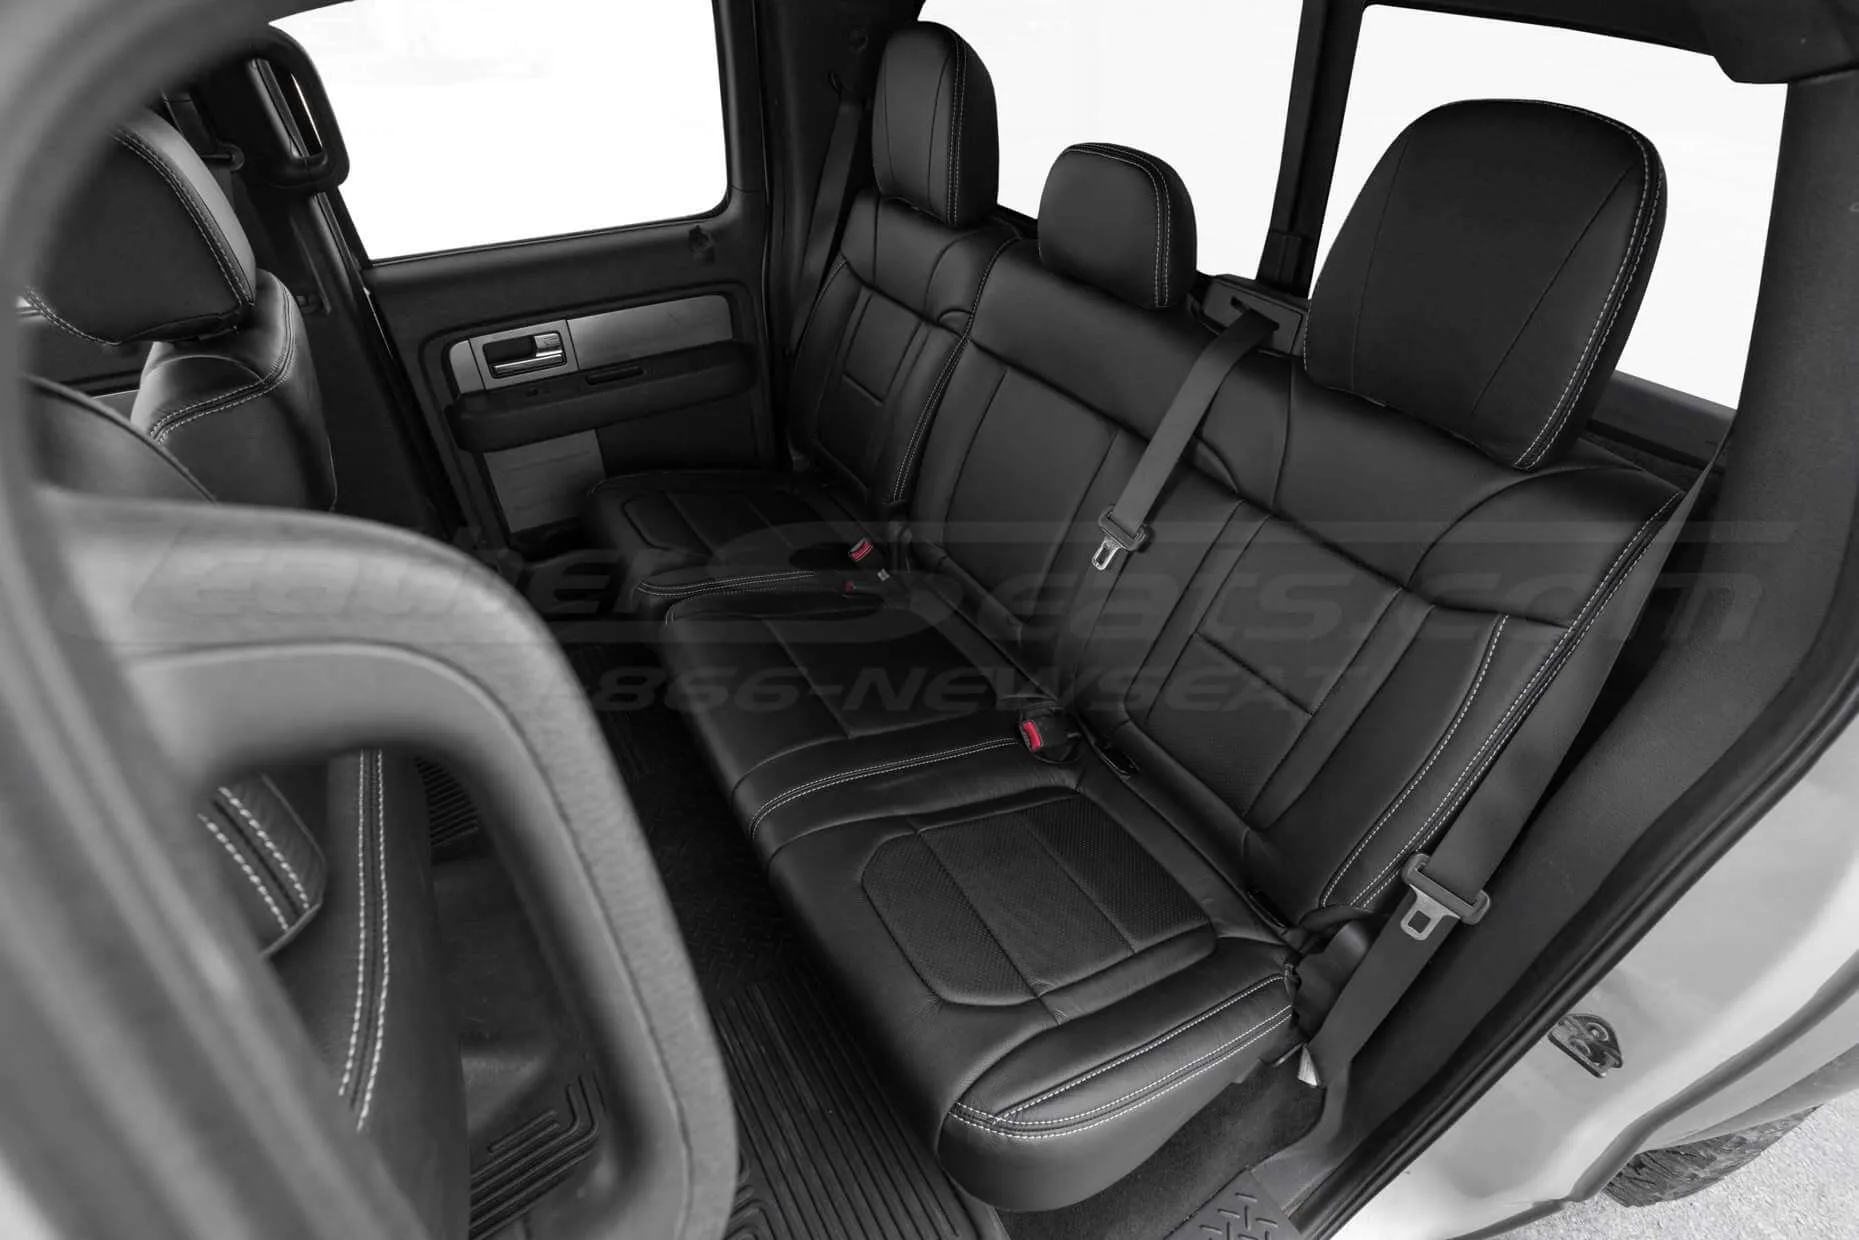 LeatherSeats.com upholstery for 2012 Ford Raptor - Rear seats